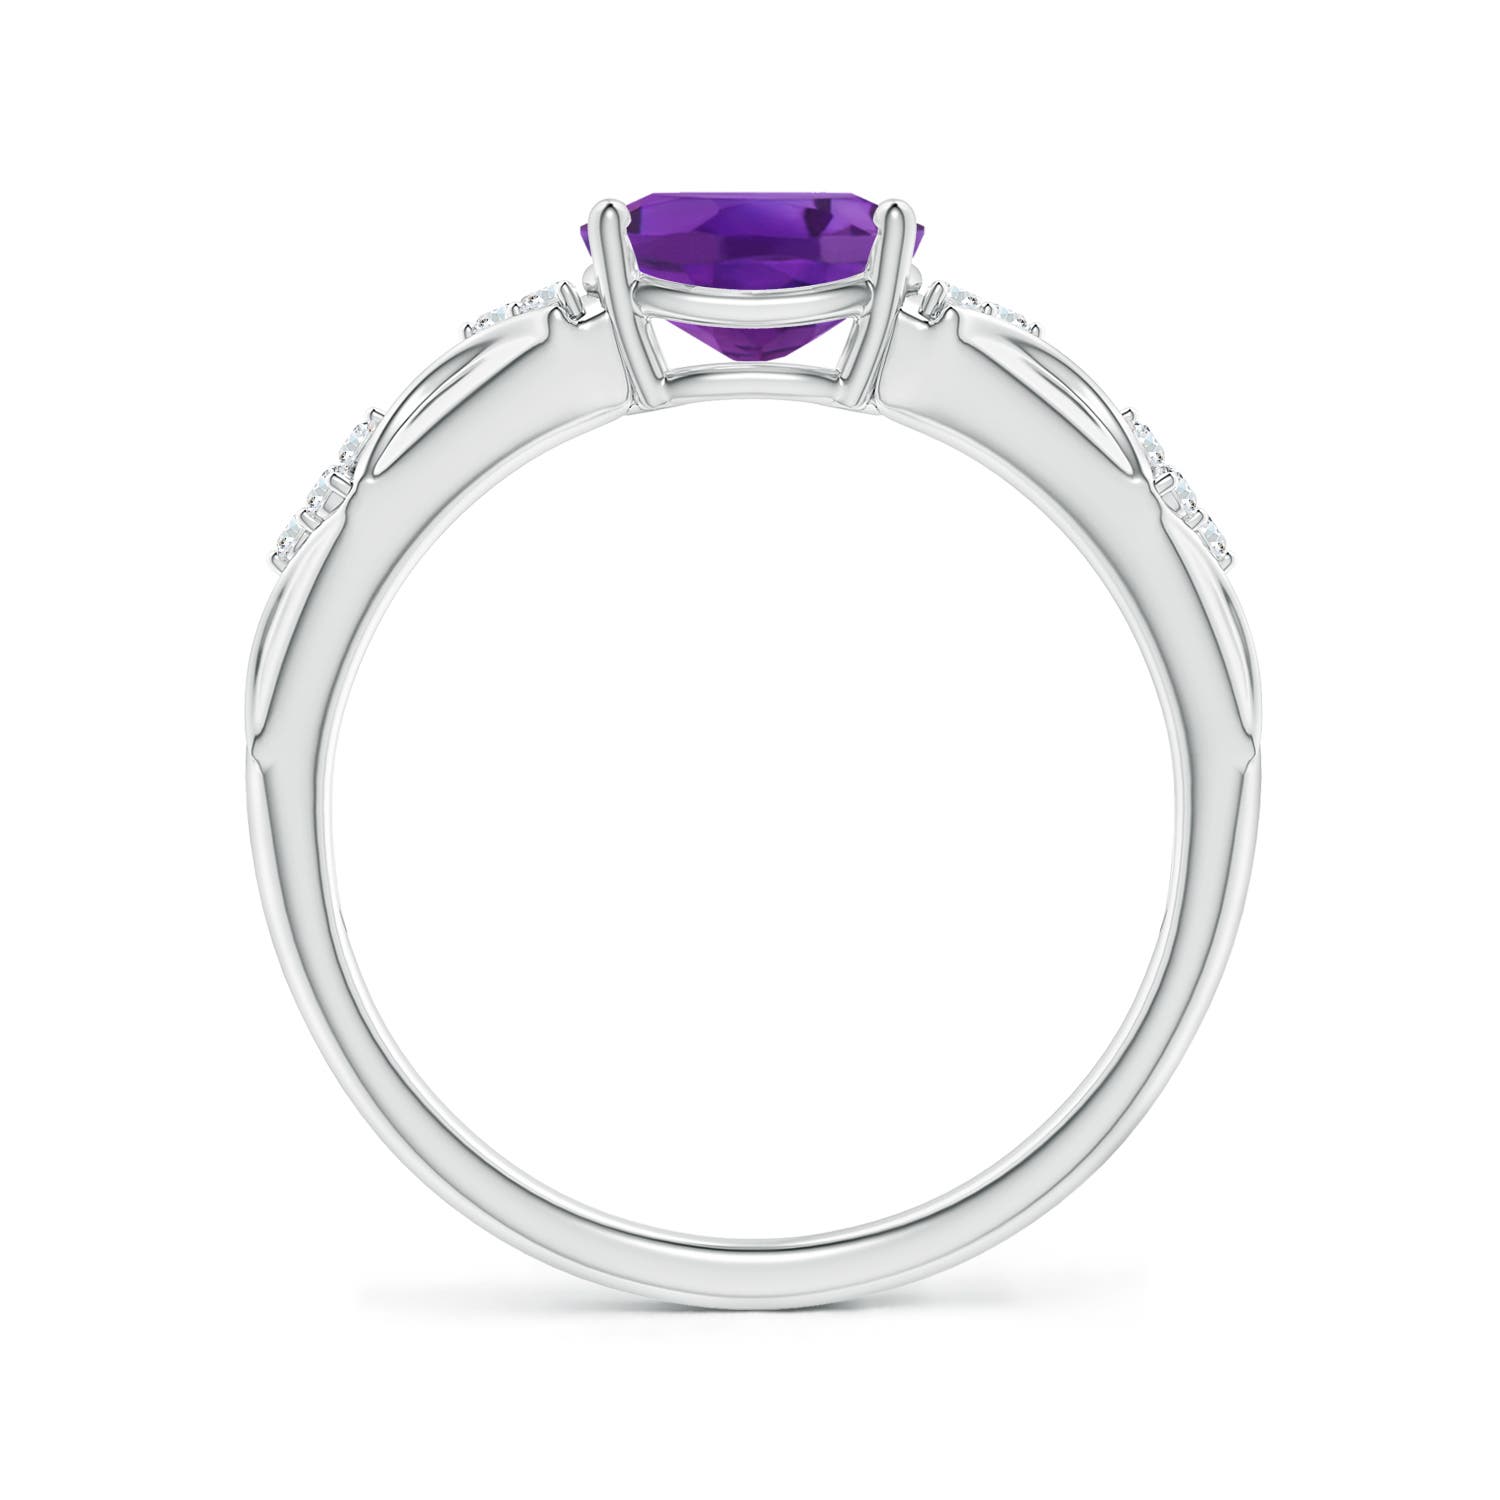 AAA - Amethyst / 1.22 CT / 14 KT White Gold